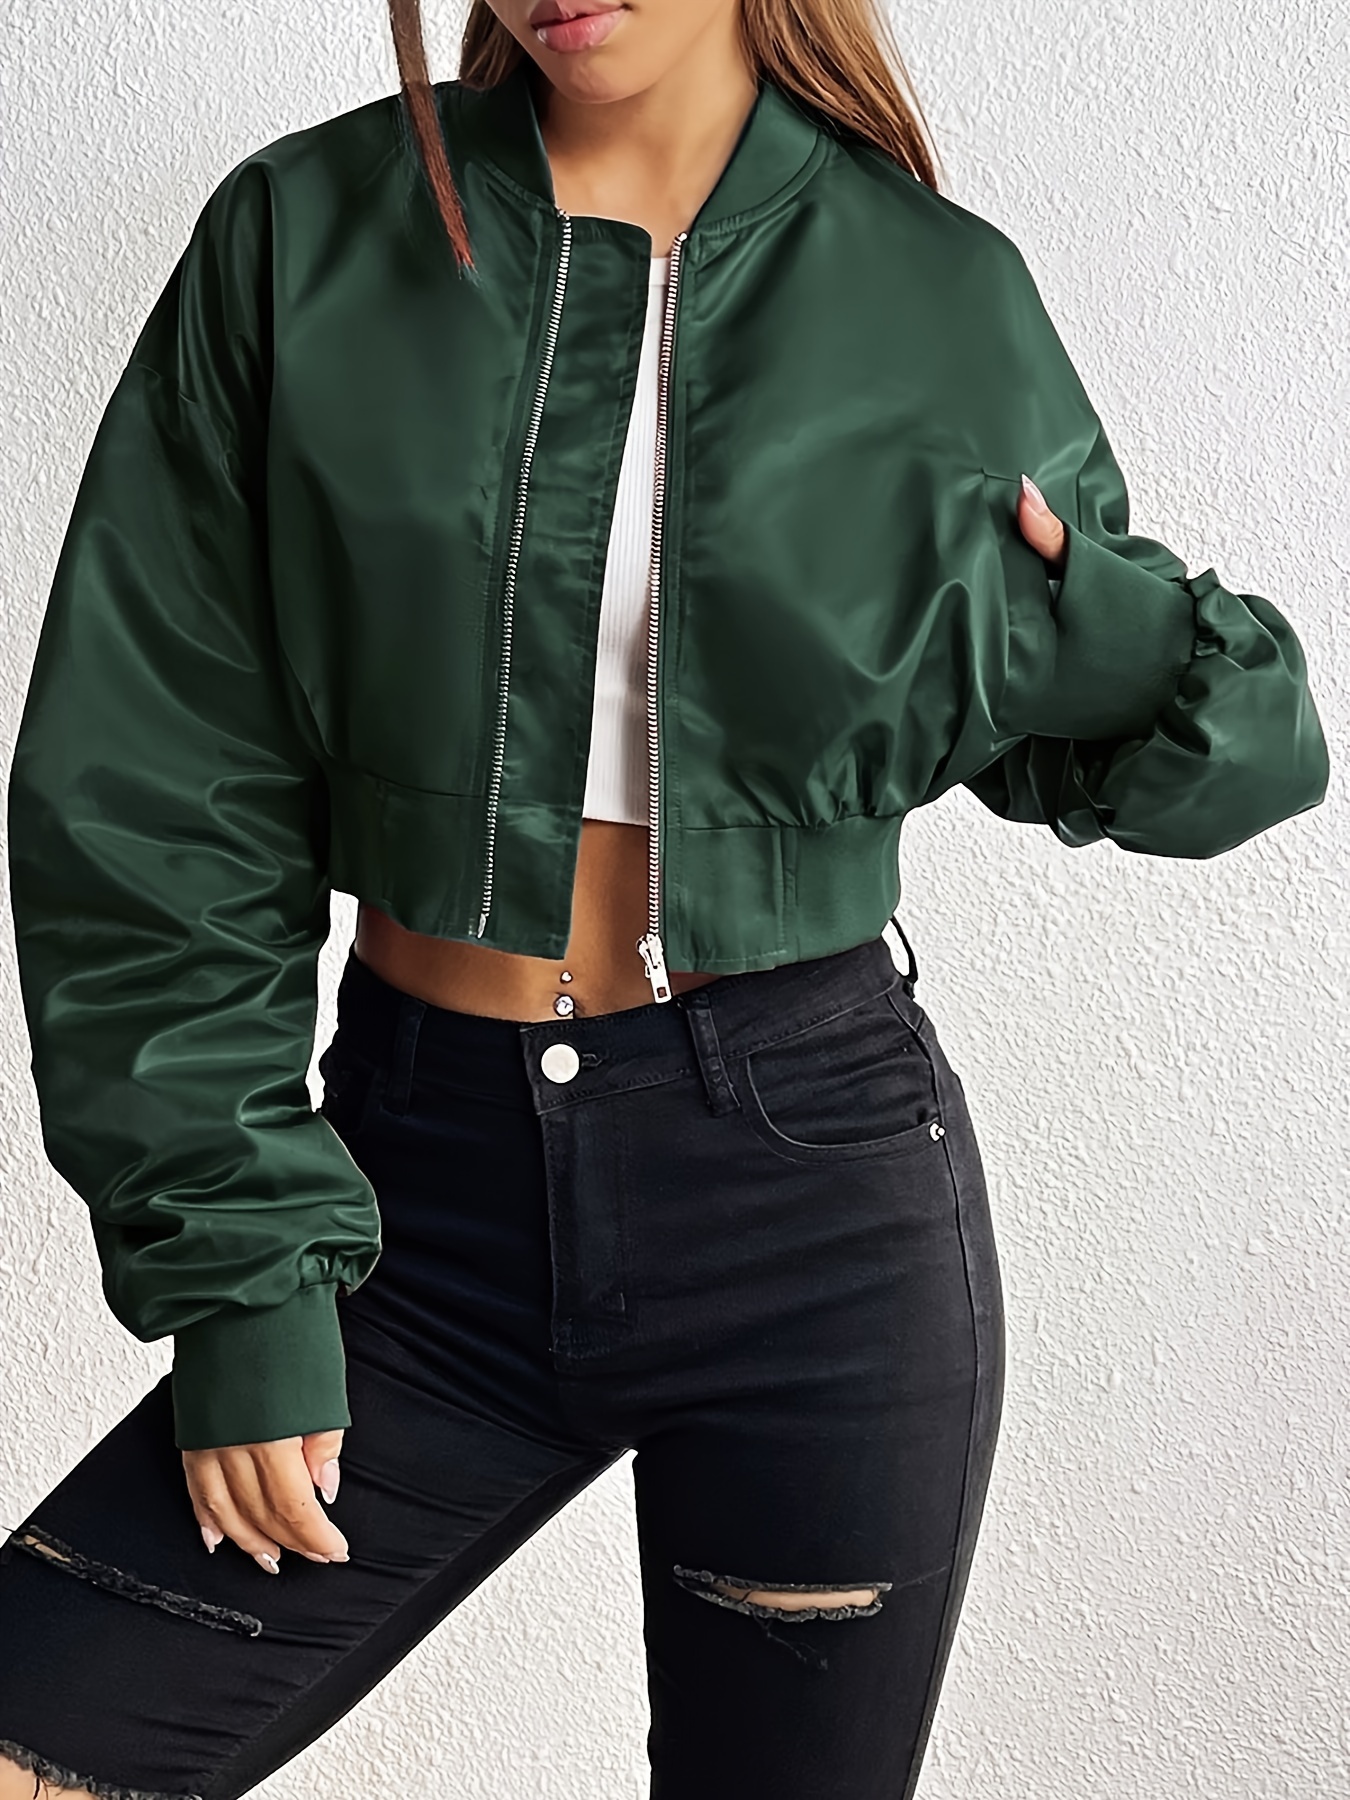  Cethrio  Warehouse Prime Deals Womens Cropped Jackets  Lightweight Zip Up Casual Inspired Bomber Jacket Coats Stand Collar Short  Outwear Tops : Clothing, Shoes & Jewelry